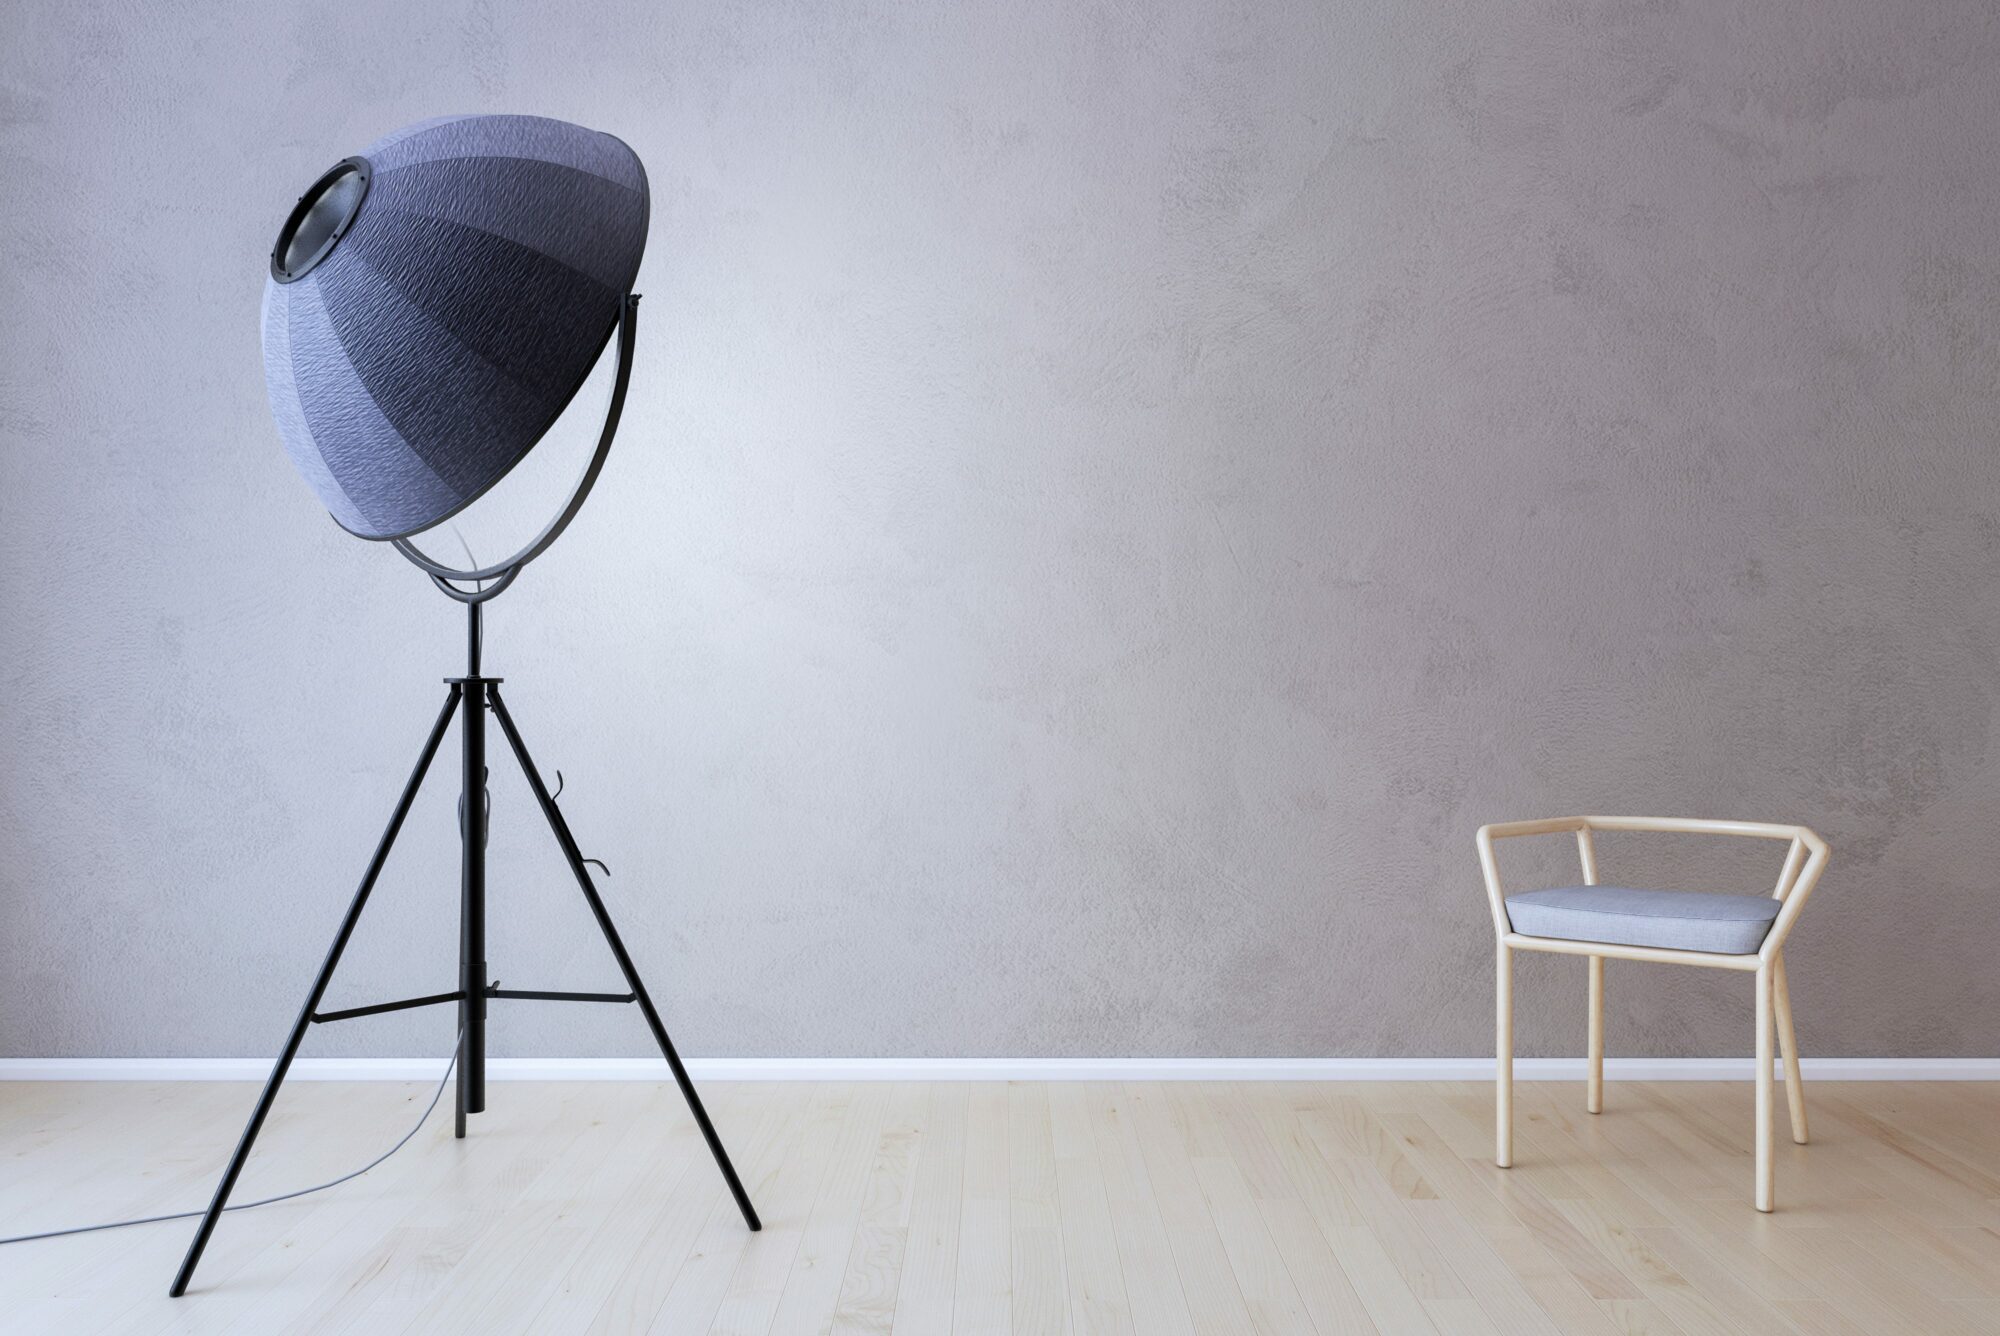 How to choose the perfect background for your promotional photos